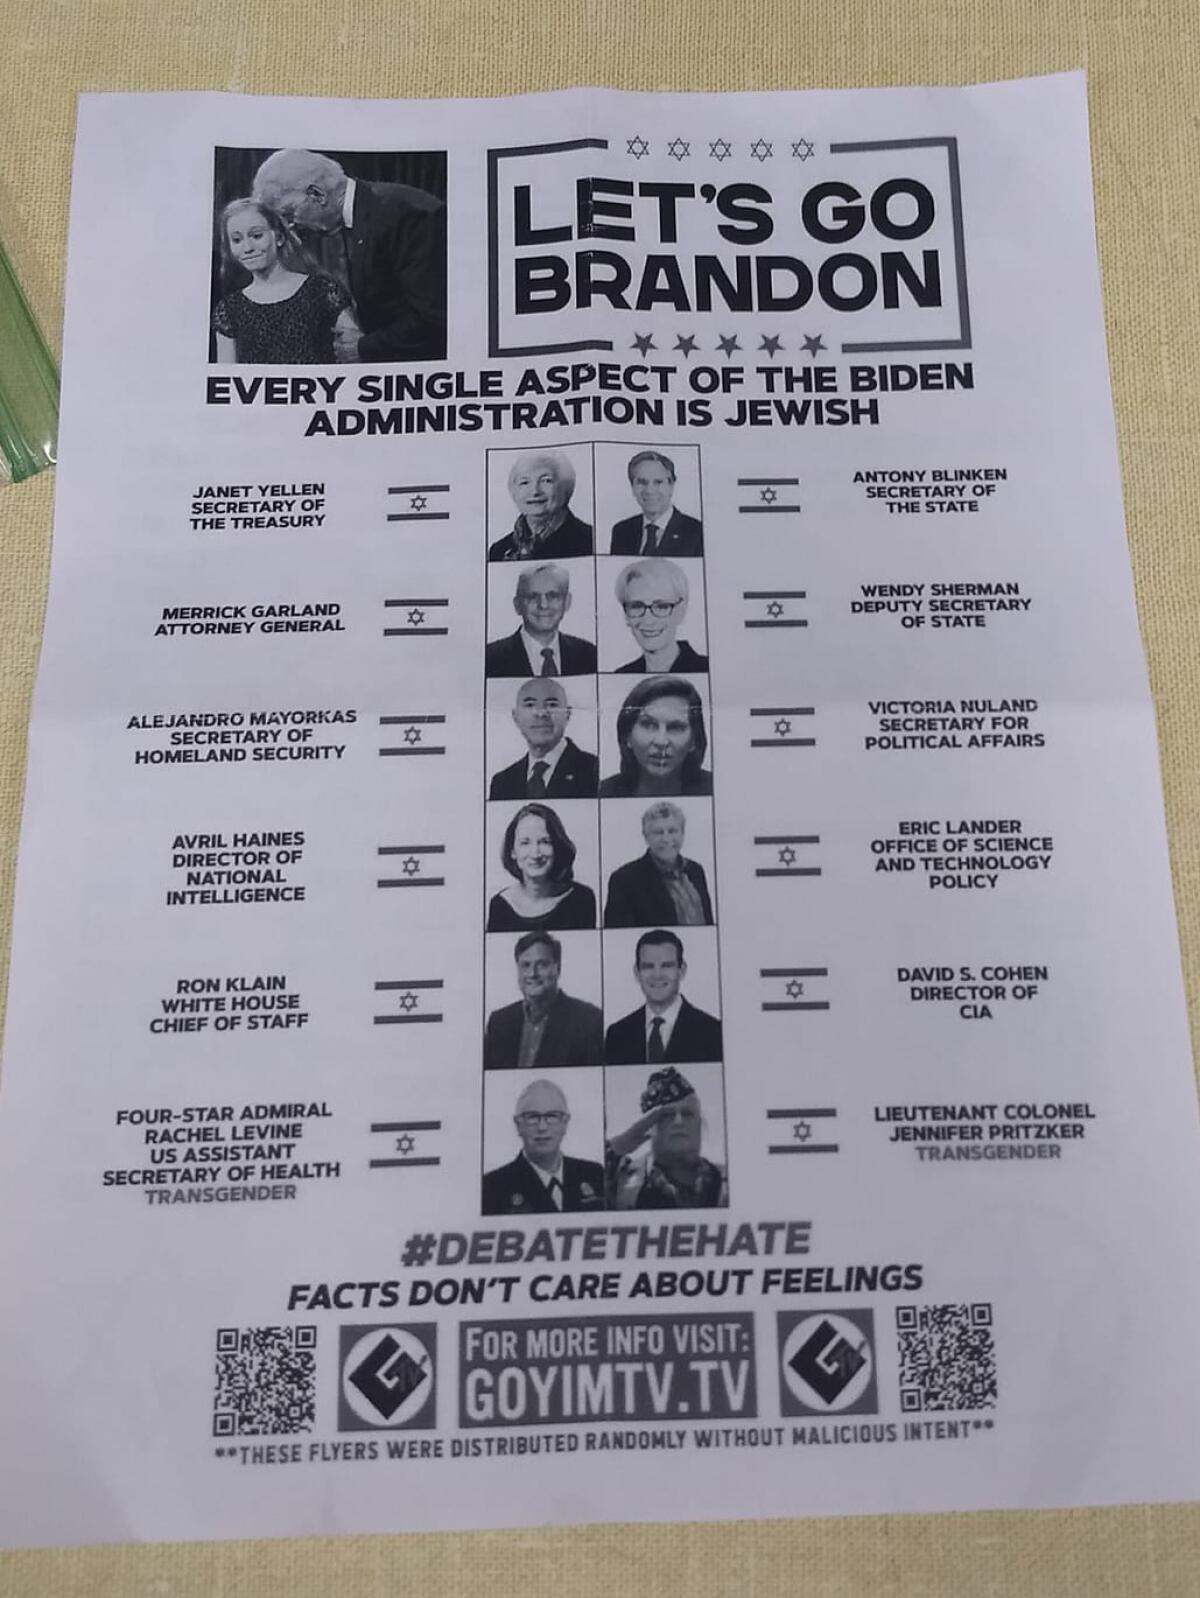 A flier with the words "Let's go Brandon" and pictures of Biden administration officials next to flags of Israel